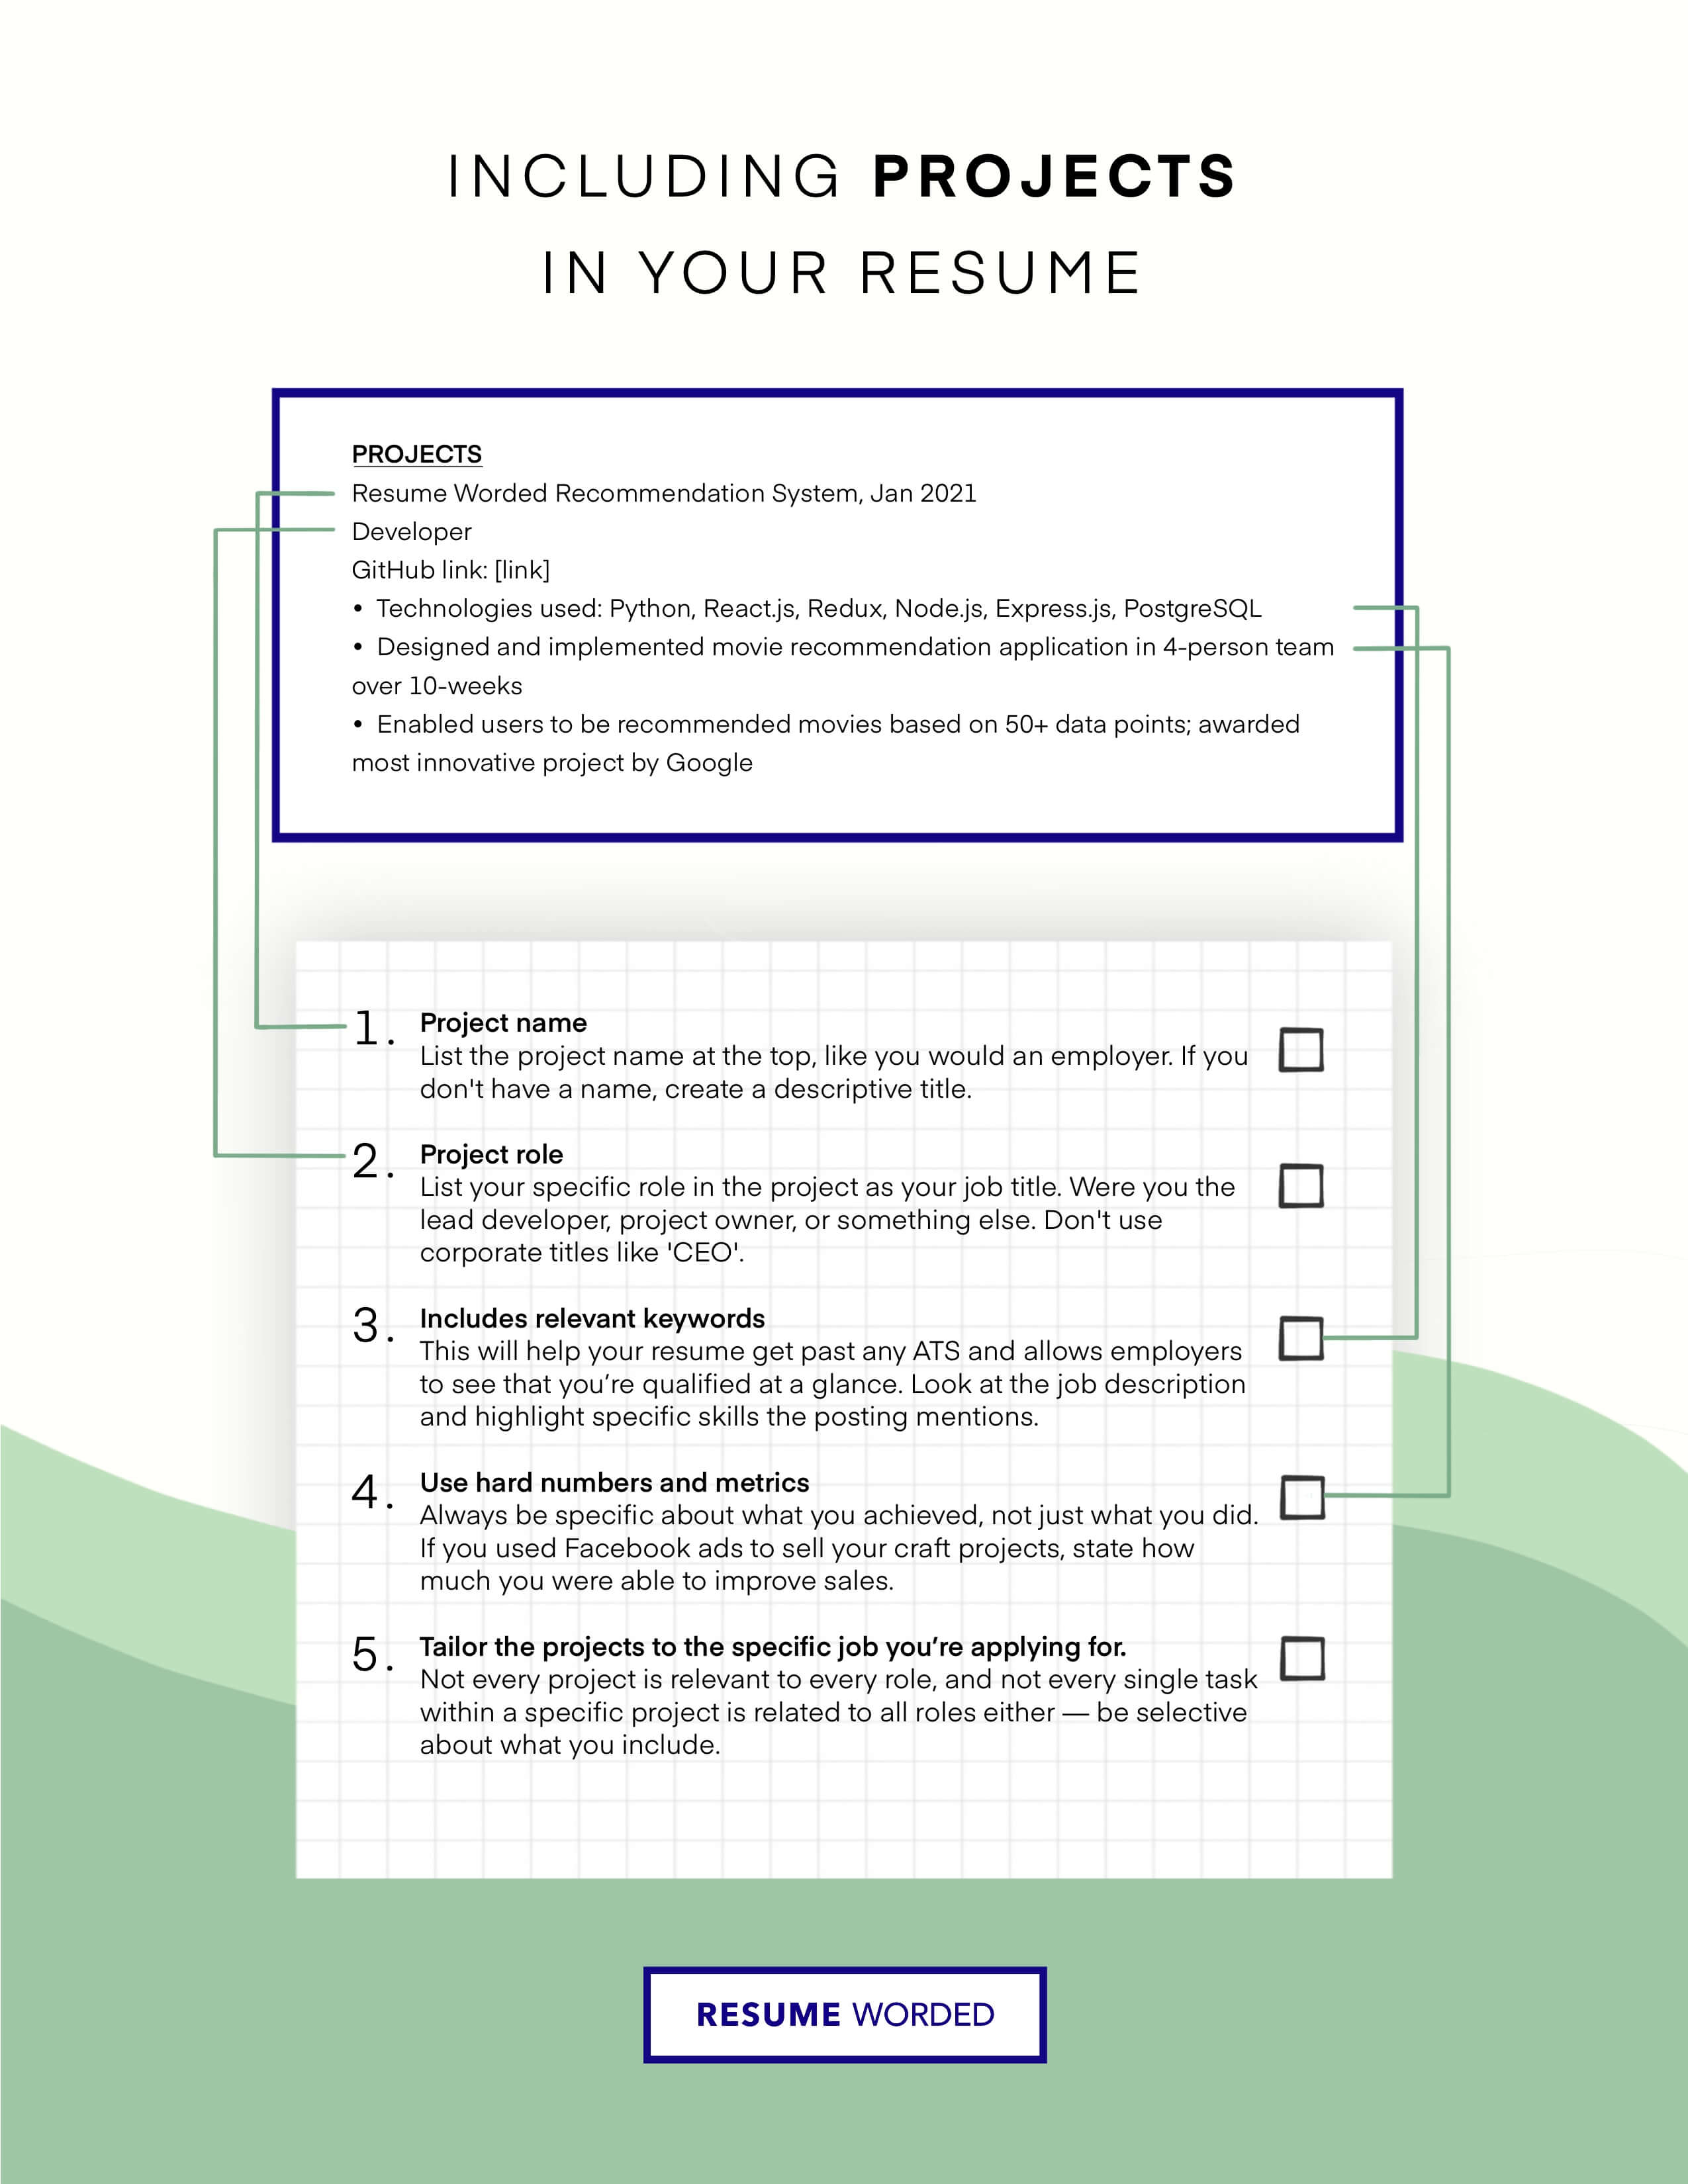 Show the step by step of your most recent projects - Business Process Specialist Resume